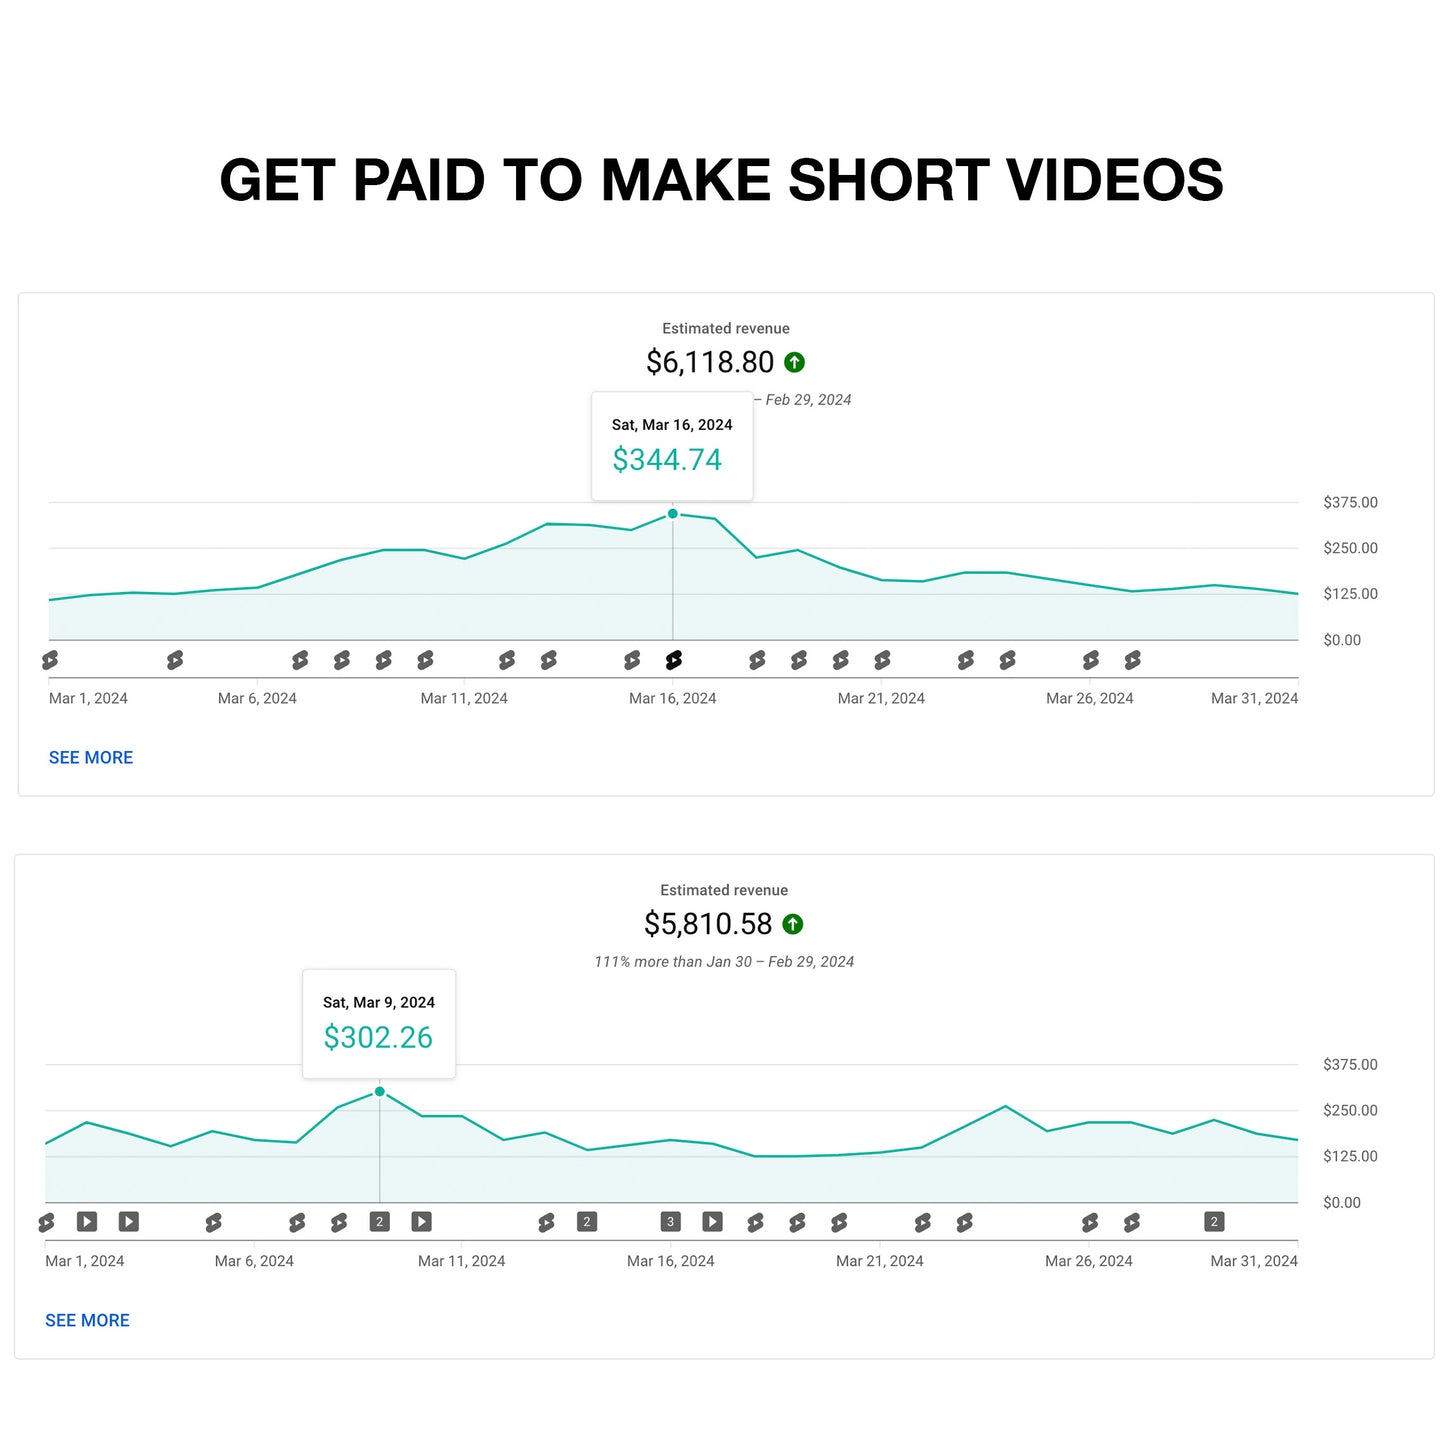 The 28-Viral-Video Strategy